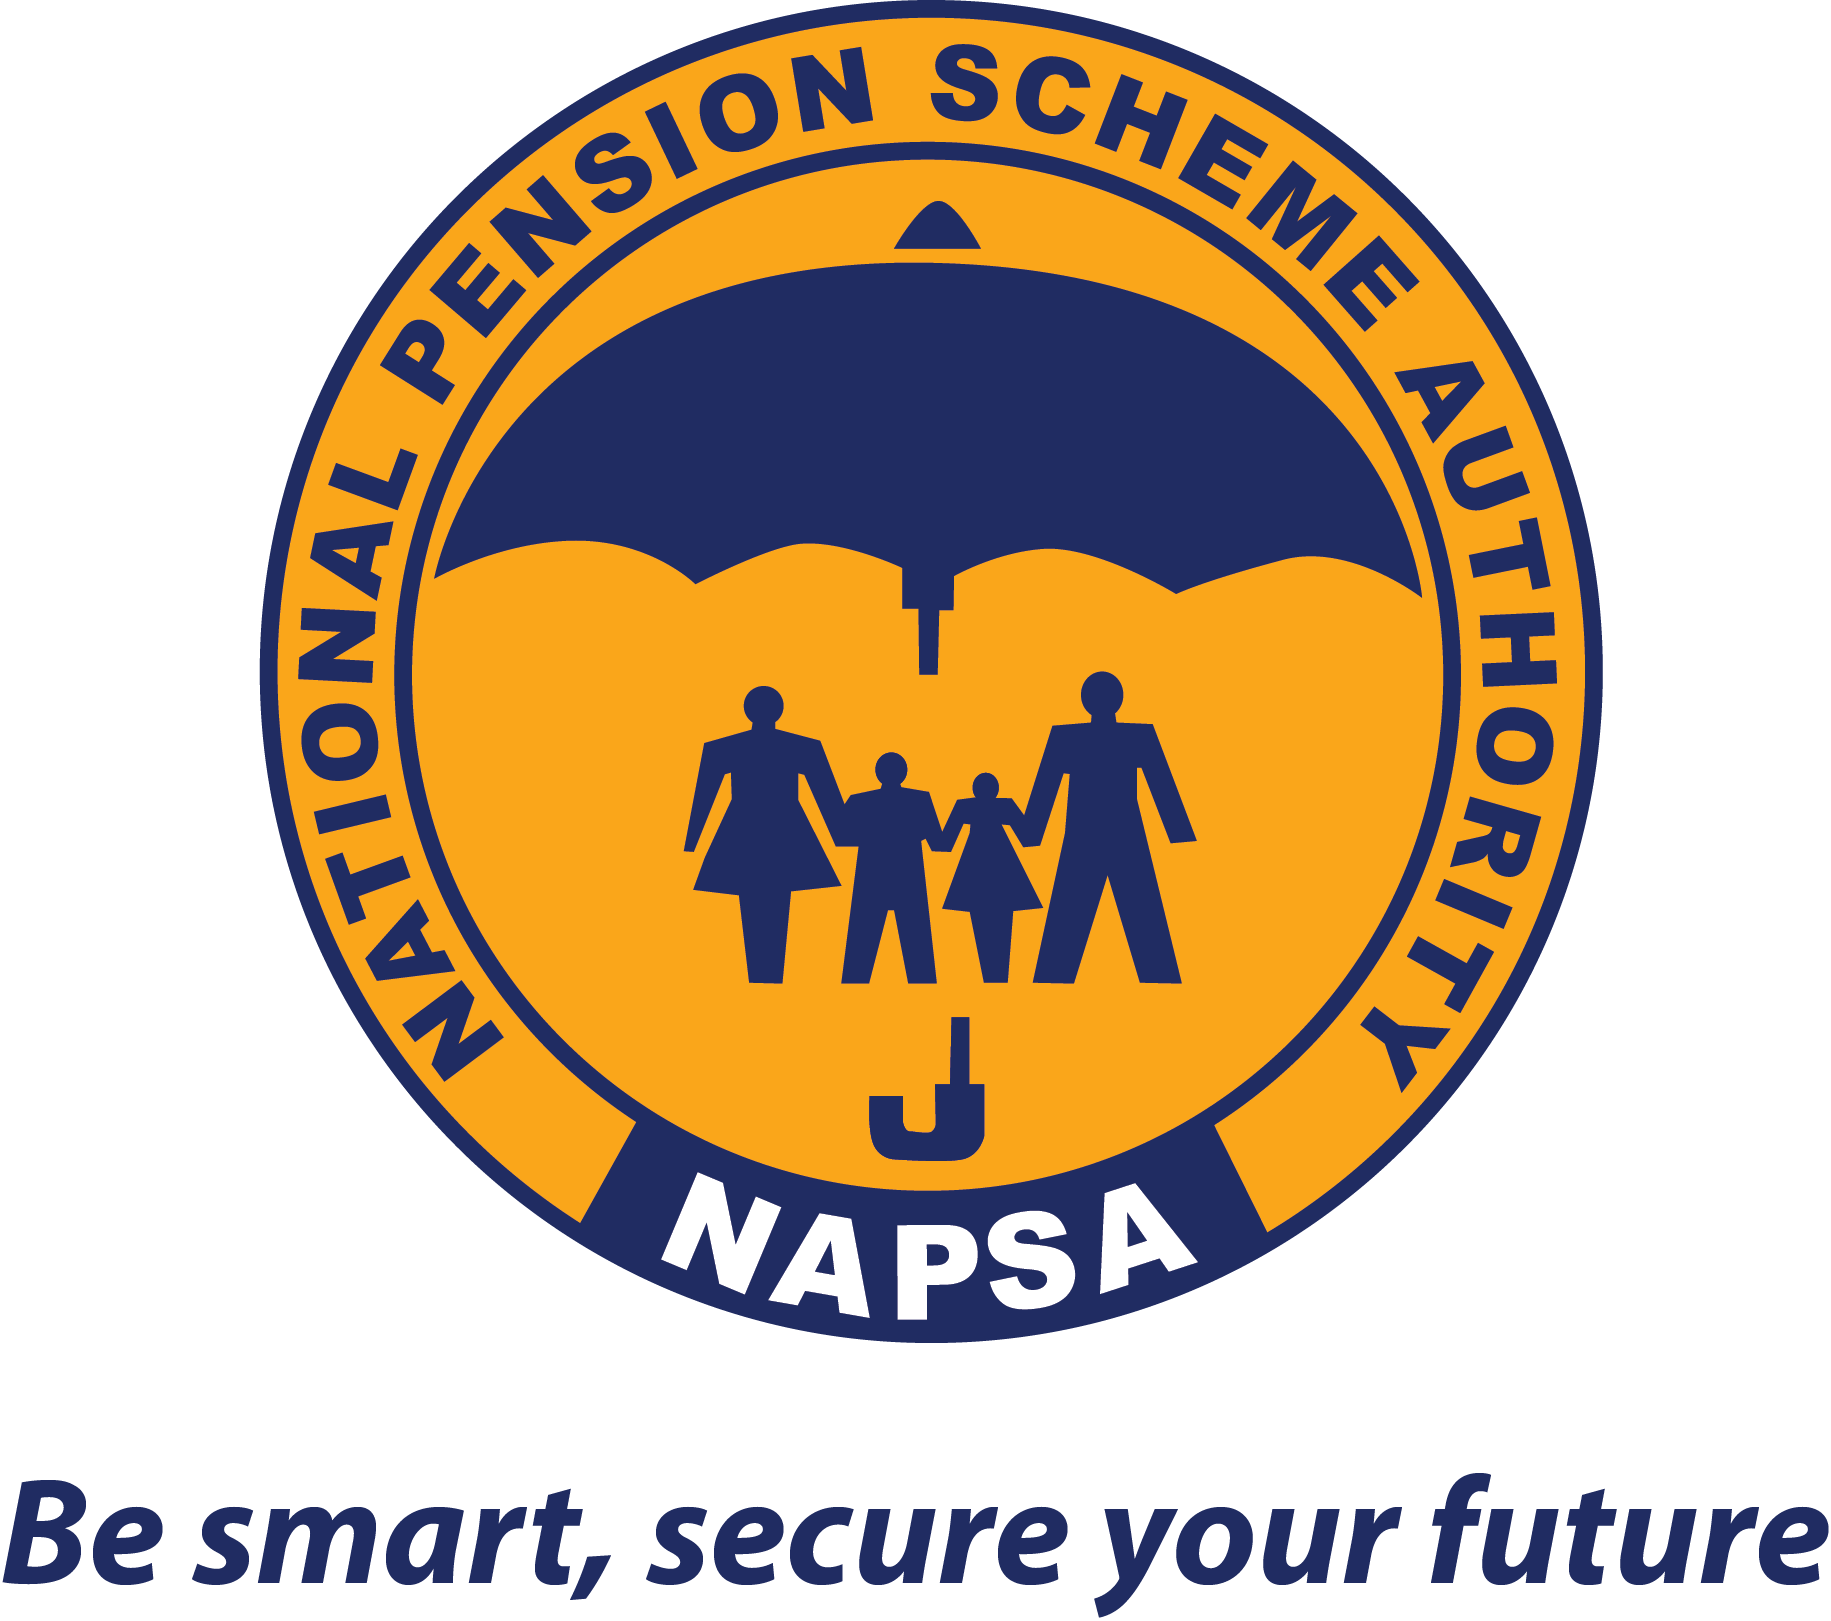 National Pension Scheme Authority